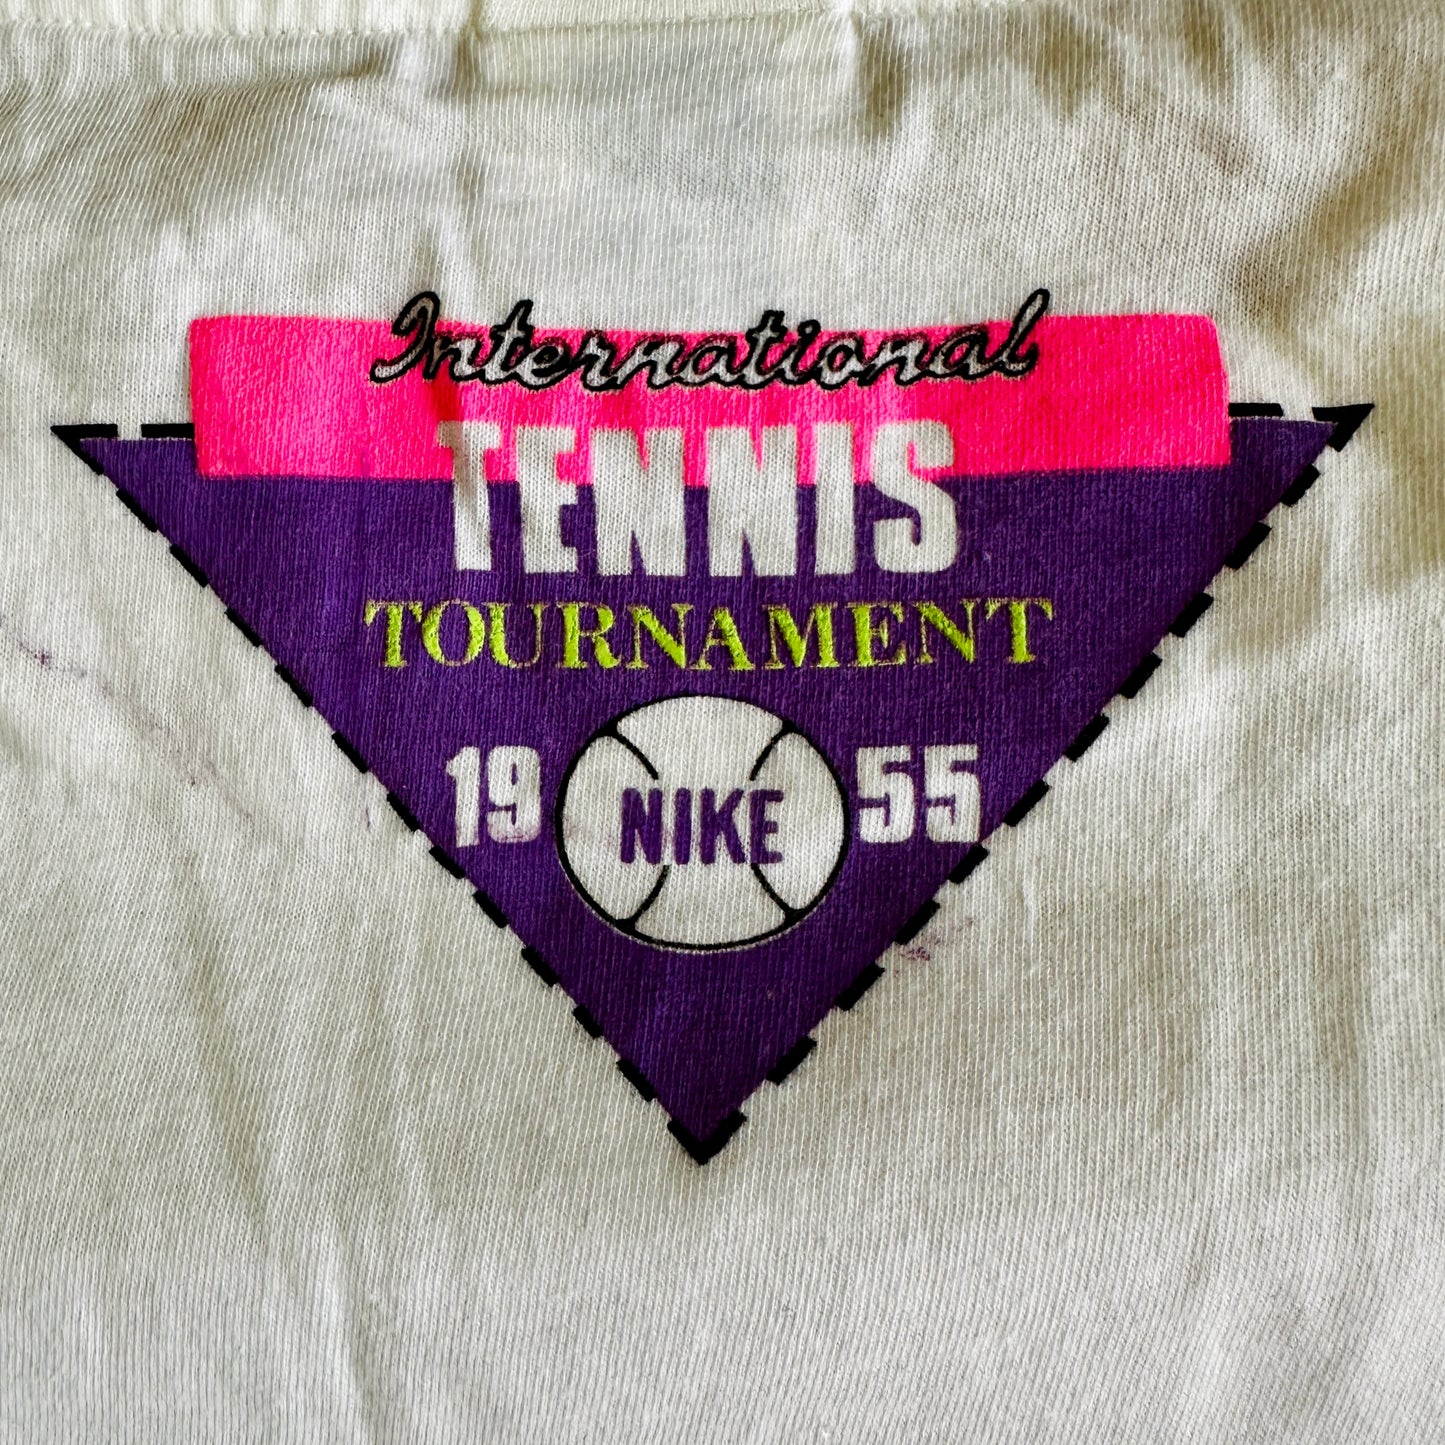 Nike 1989 Vintage Tennis Tournament T-Shirt - L - Made in Italy